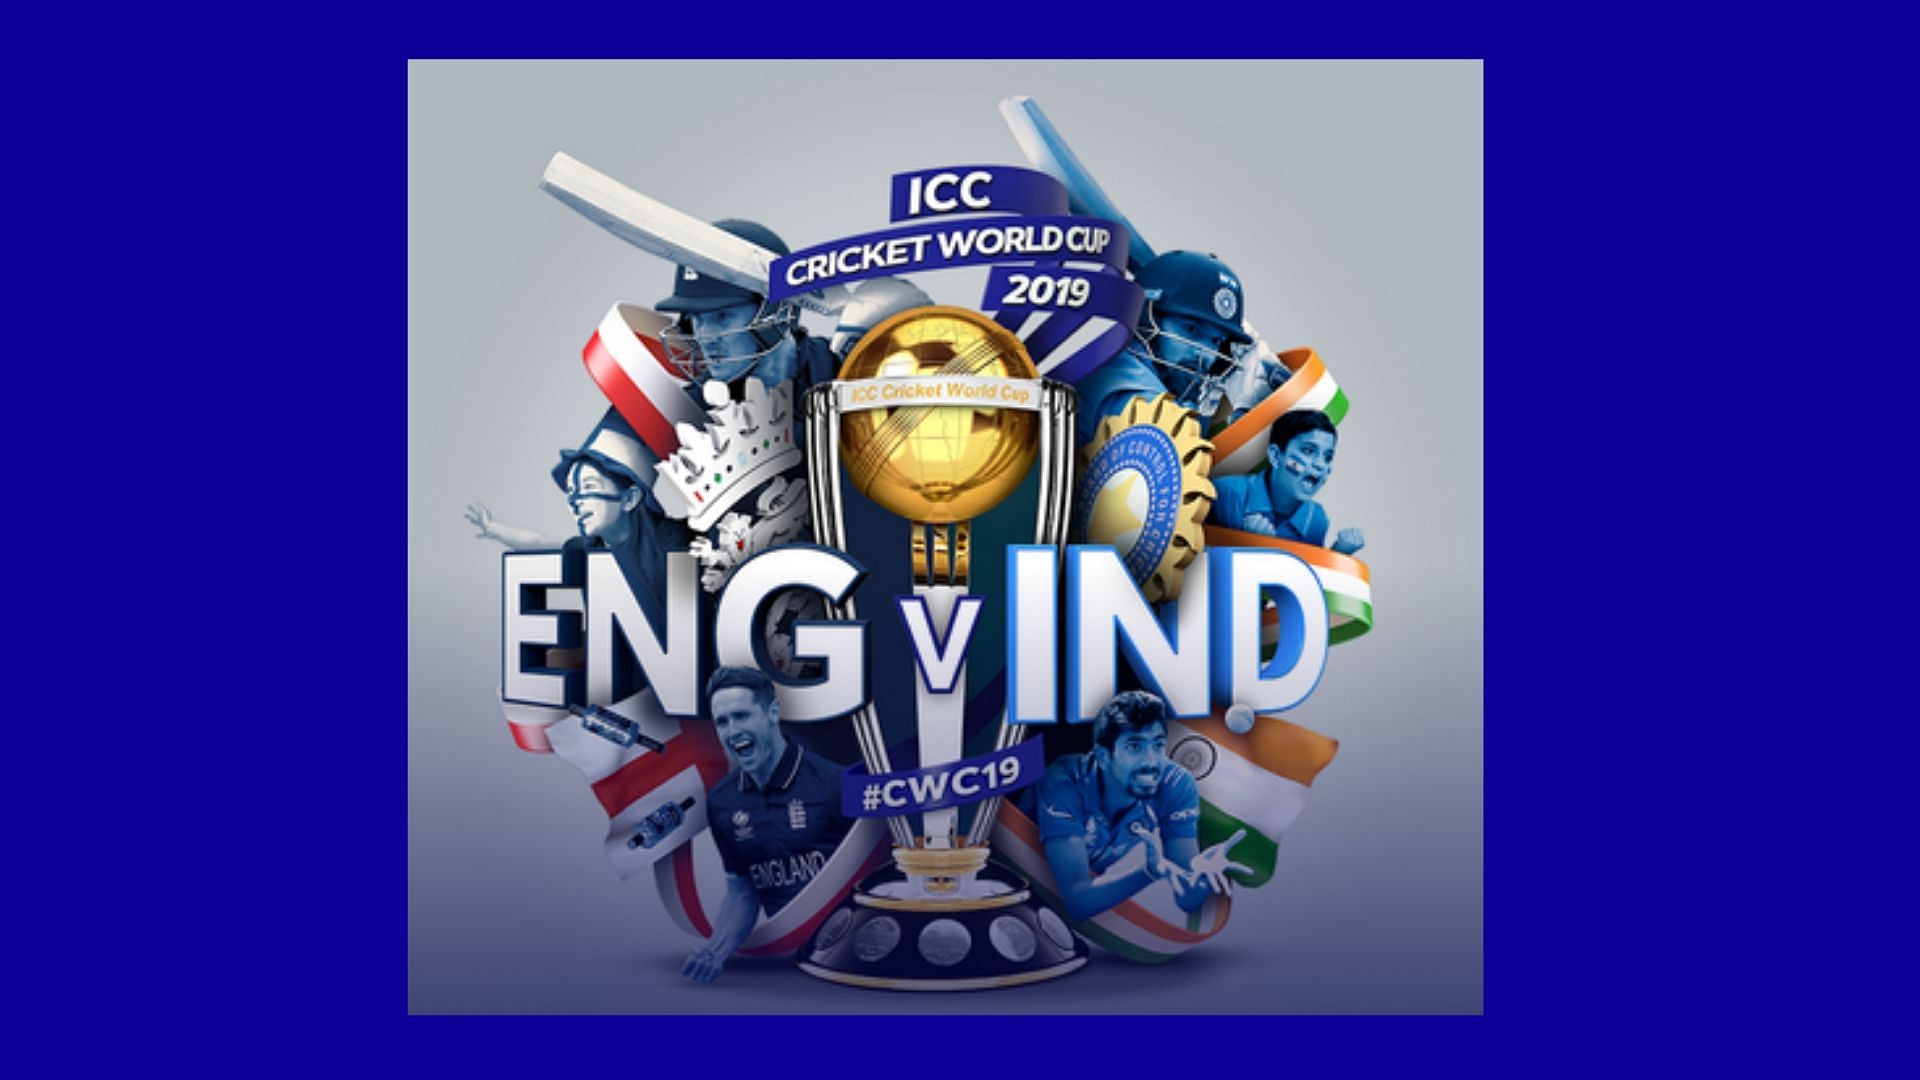 India Vs England, How the match played out on social media